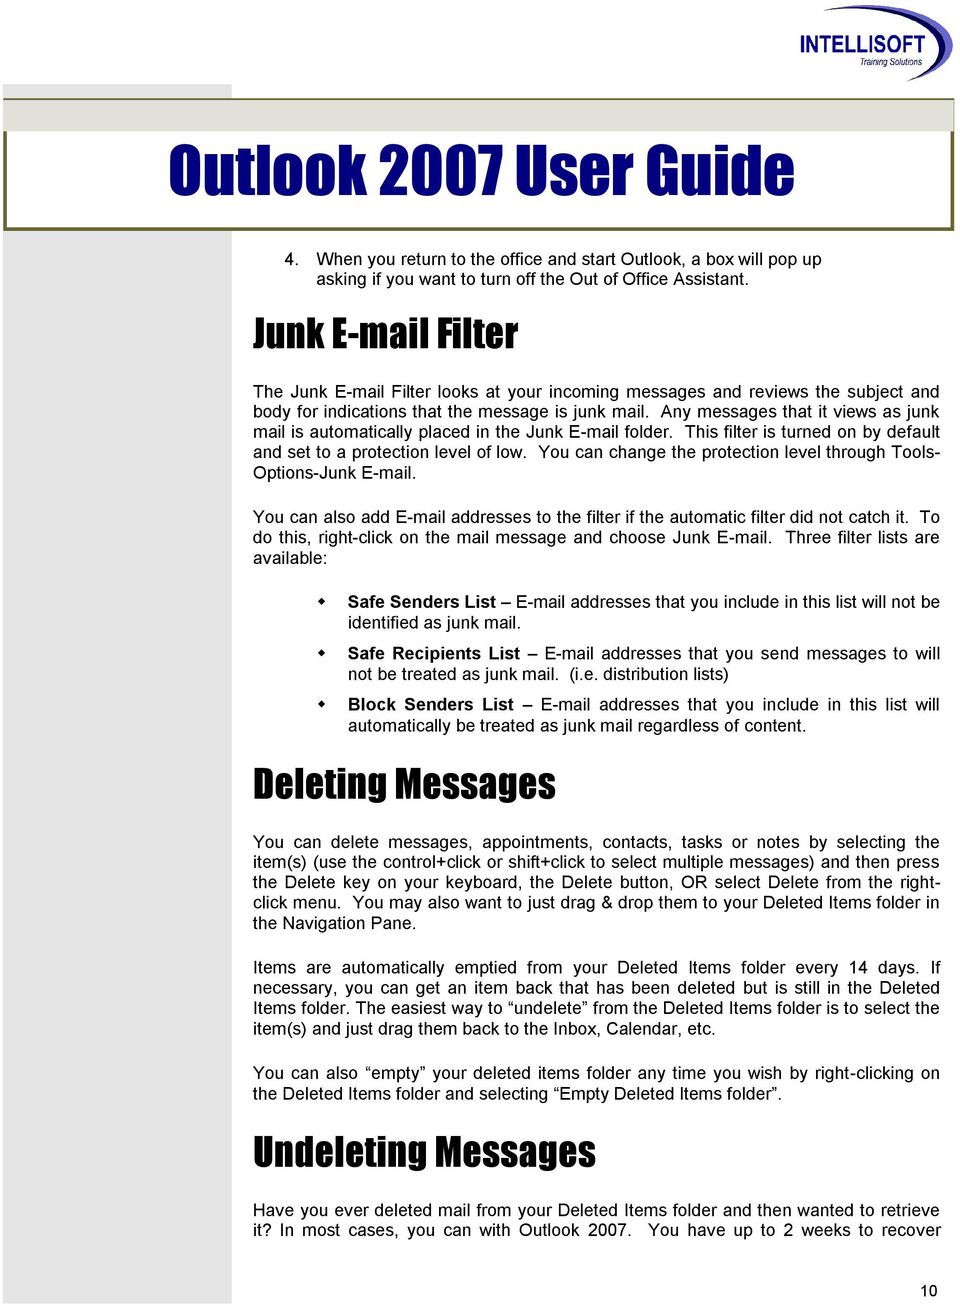 Any messages that it views as junk mail is automatically placed in the Junk E-mail folder. This filter is turned on by default and set to a protection level of low.